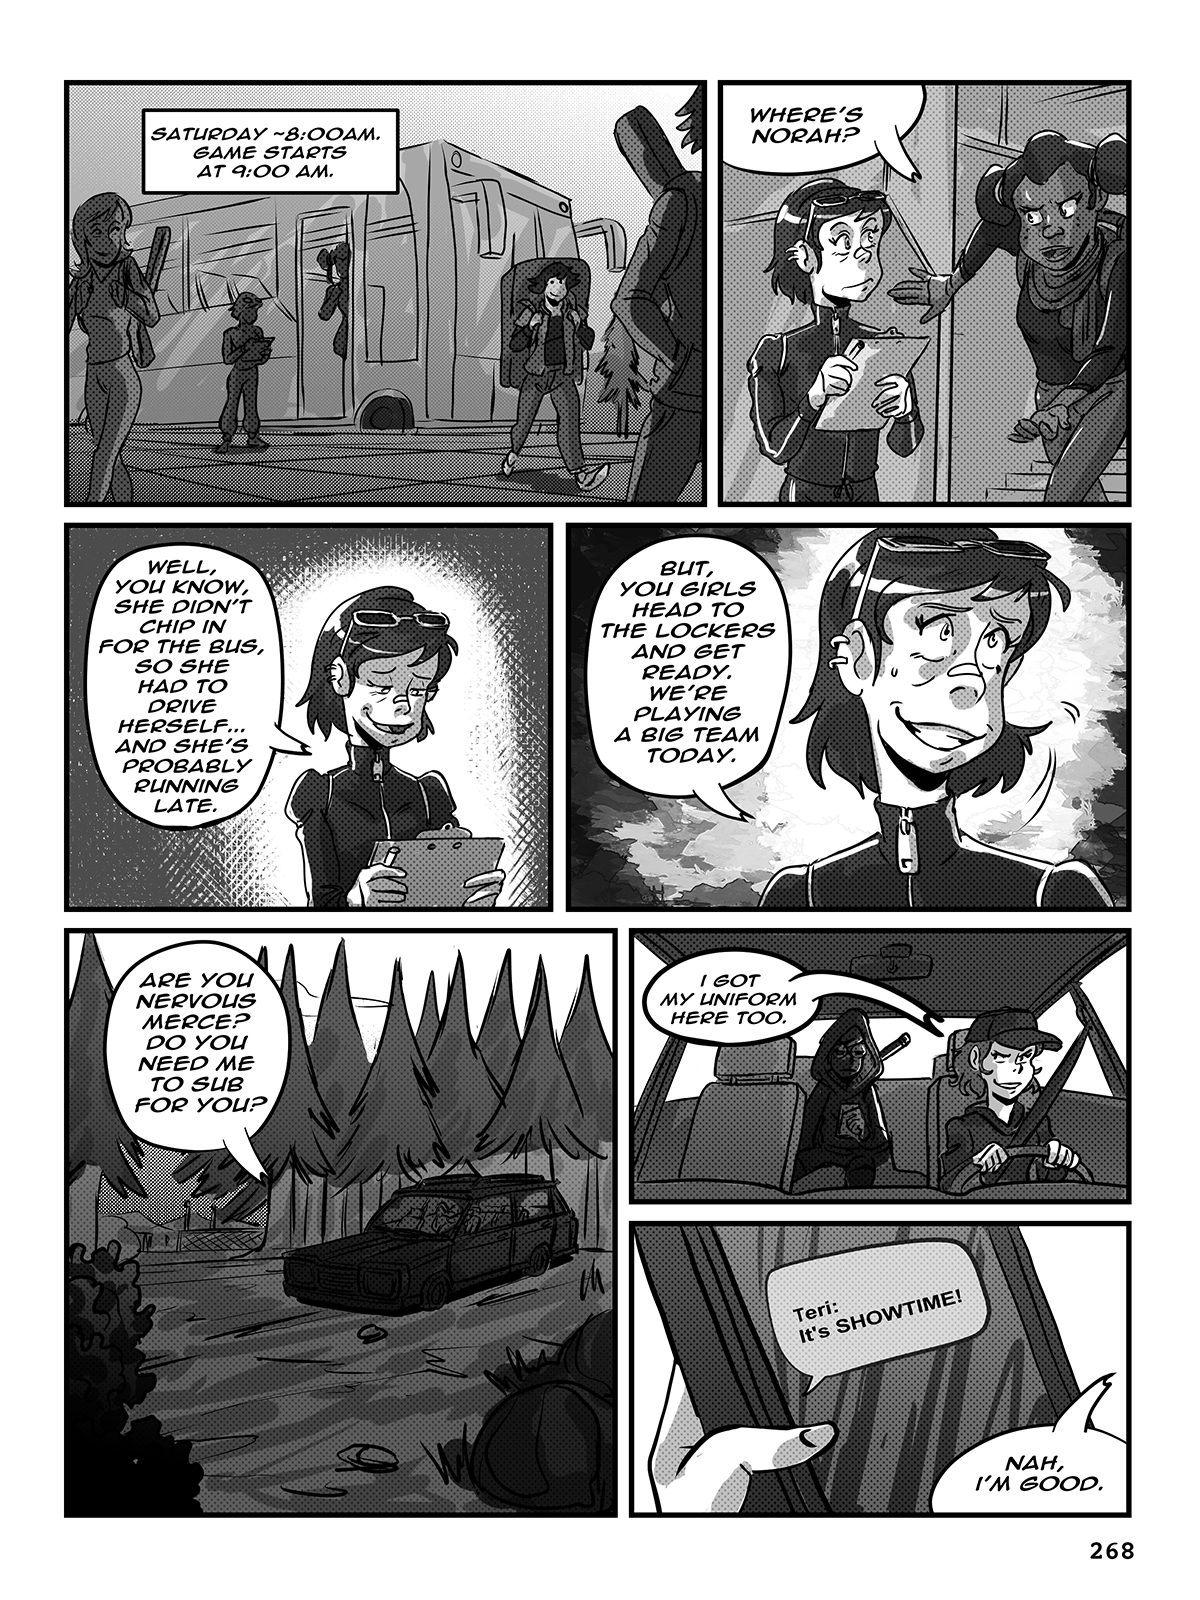 Hockey, Love, & GUTS! – Chapter 9 – Page 268